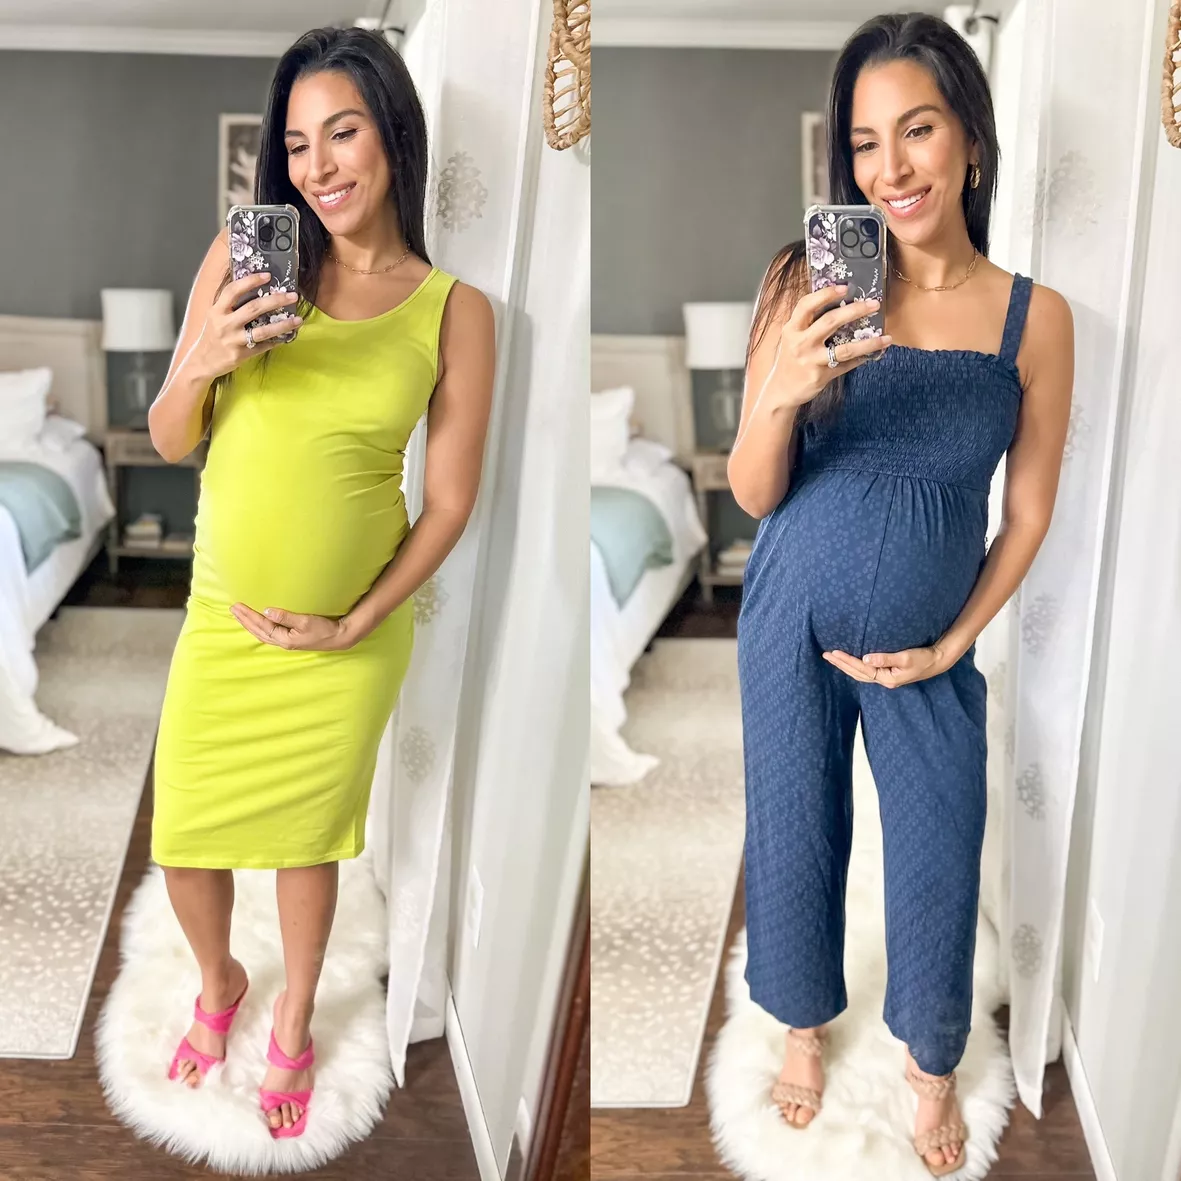 30 Maternity Outfits & Stylish Maternity Clothes